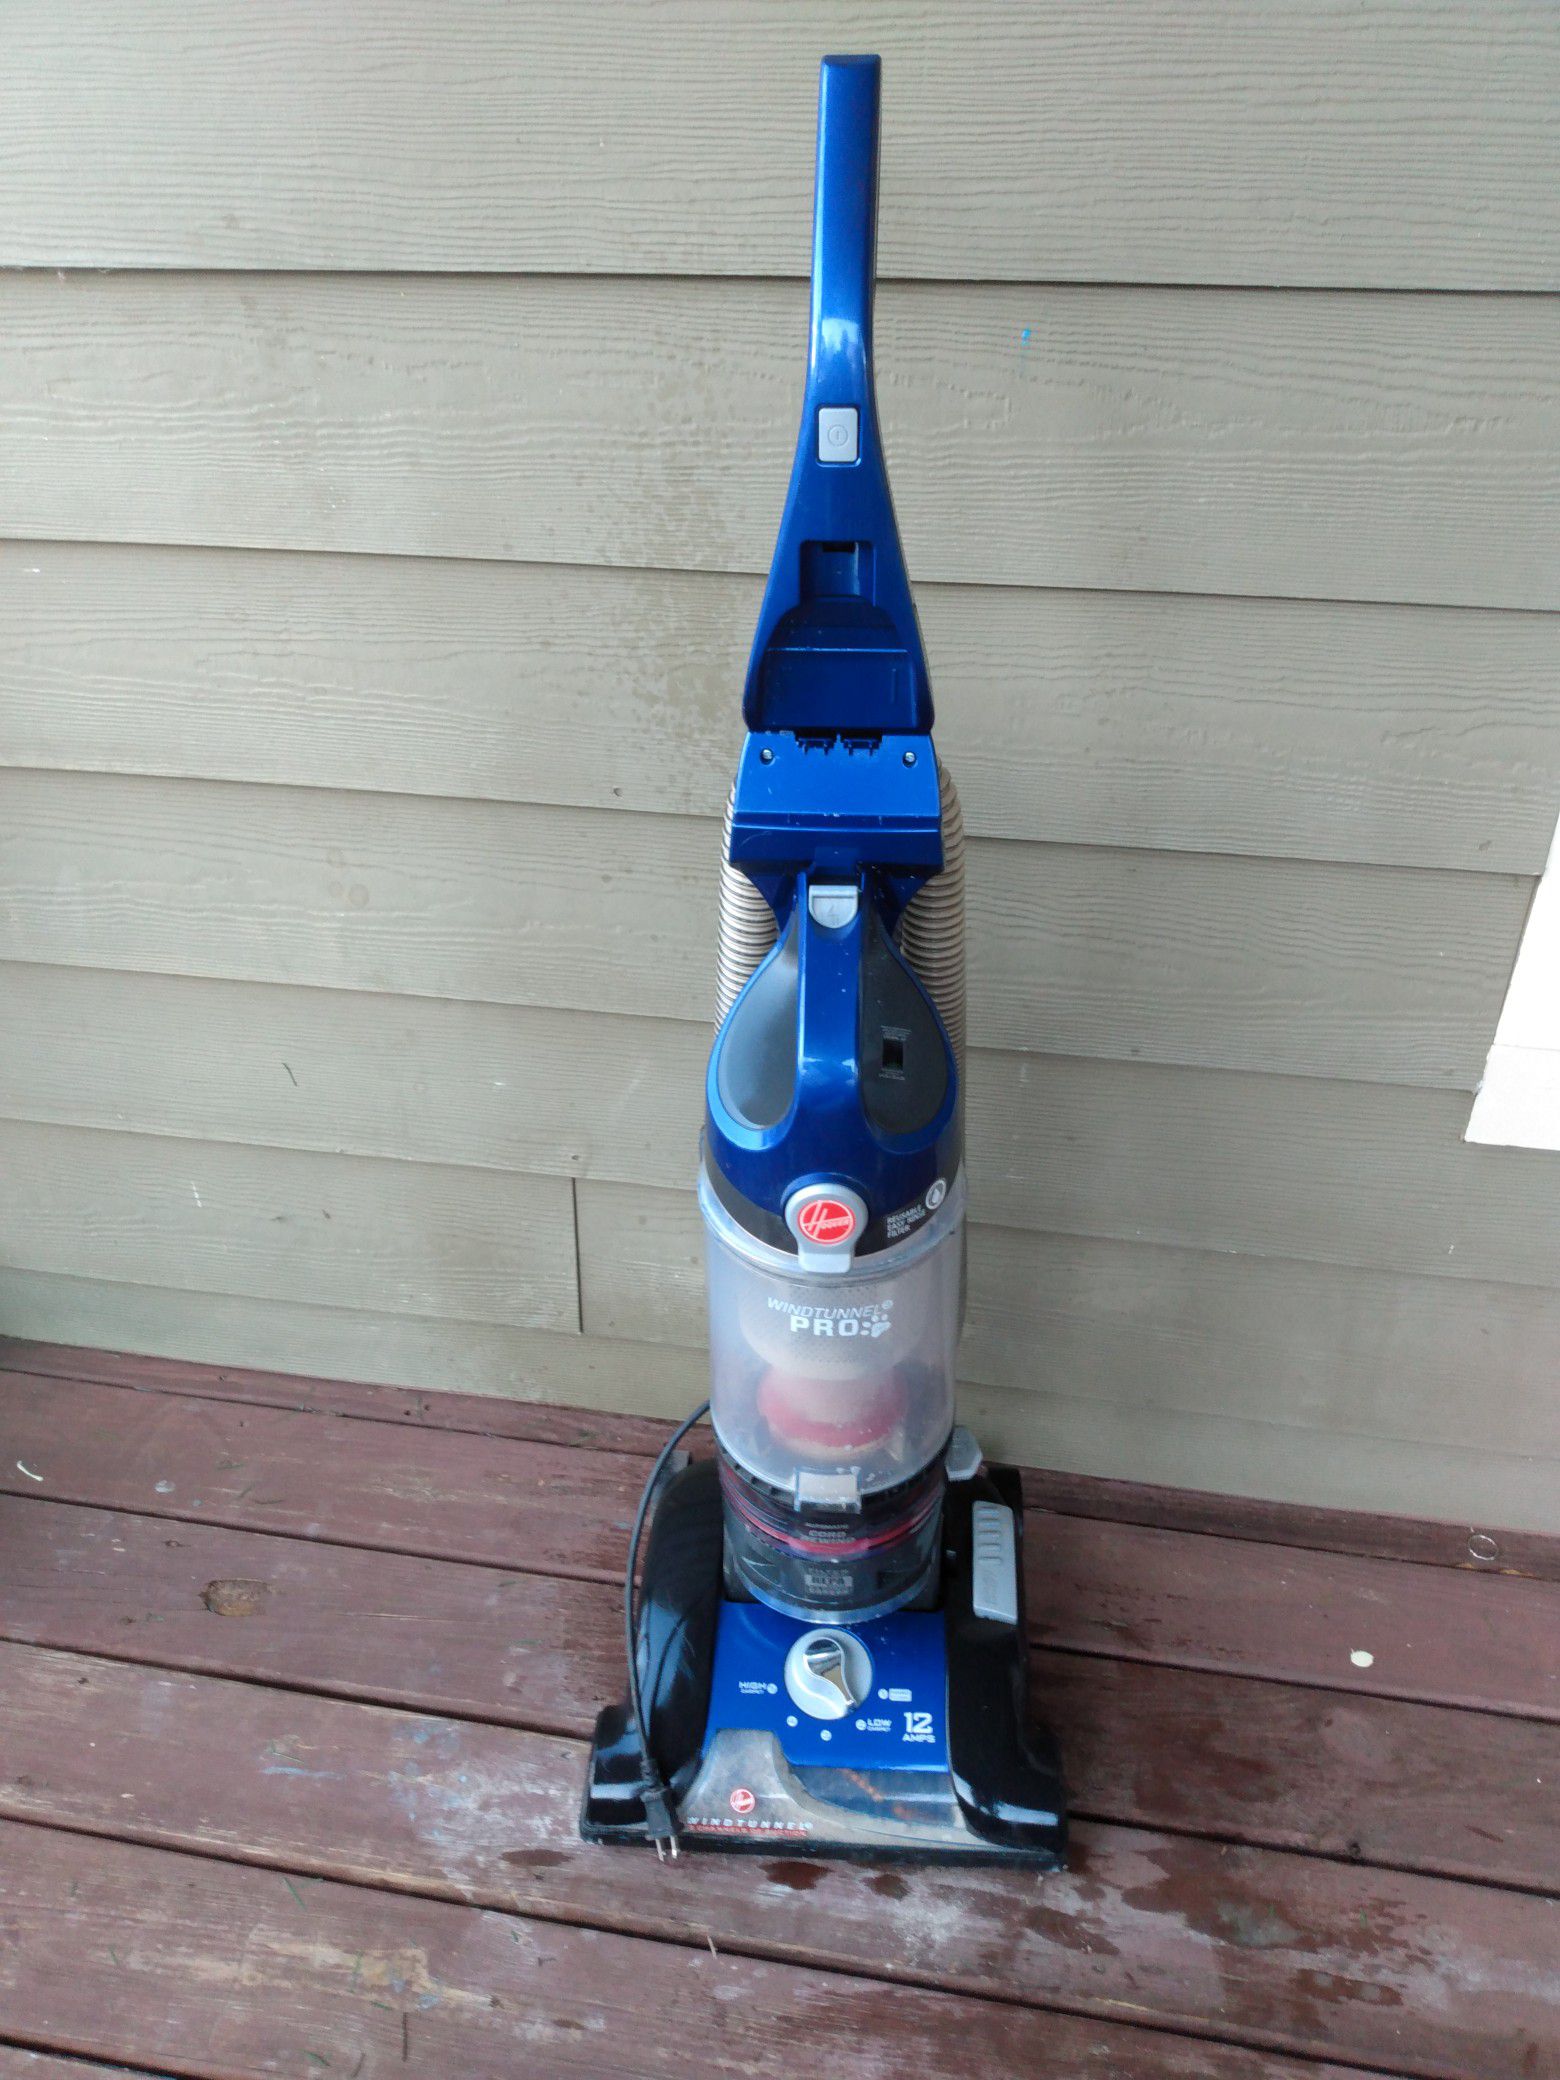 Hoover bagless wind tunnel blue vacuum cleaner